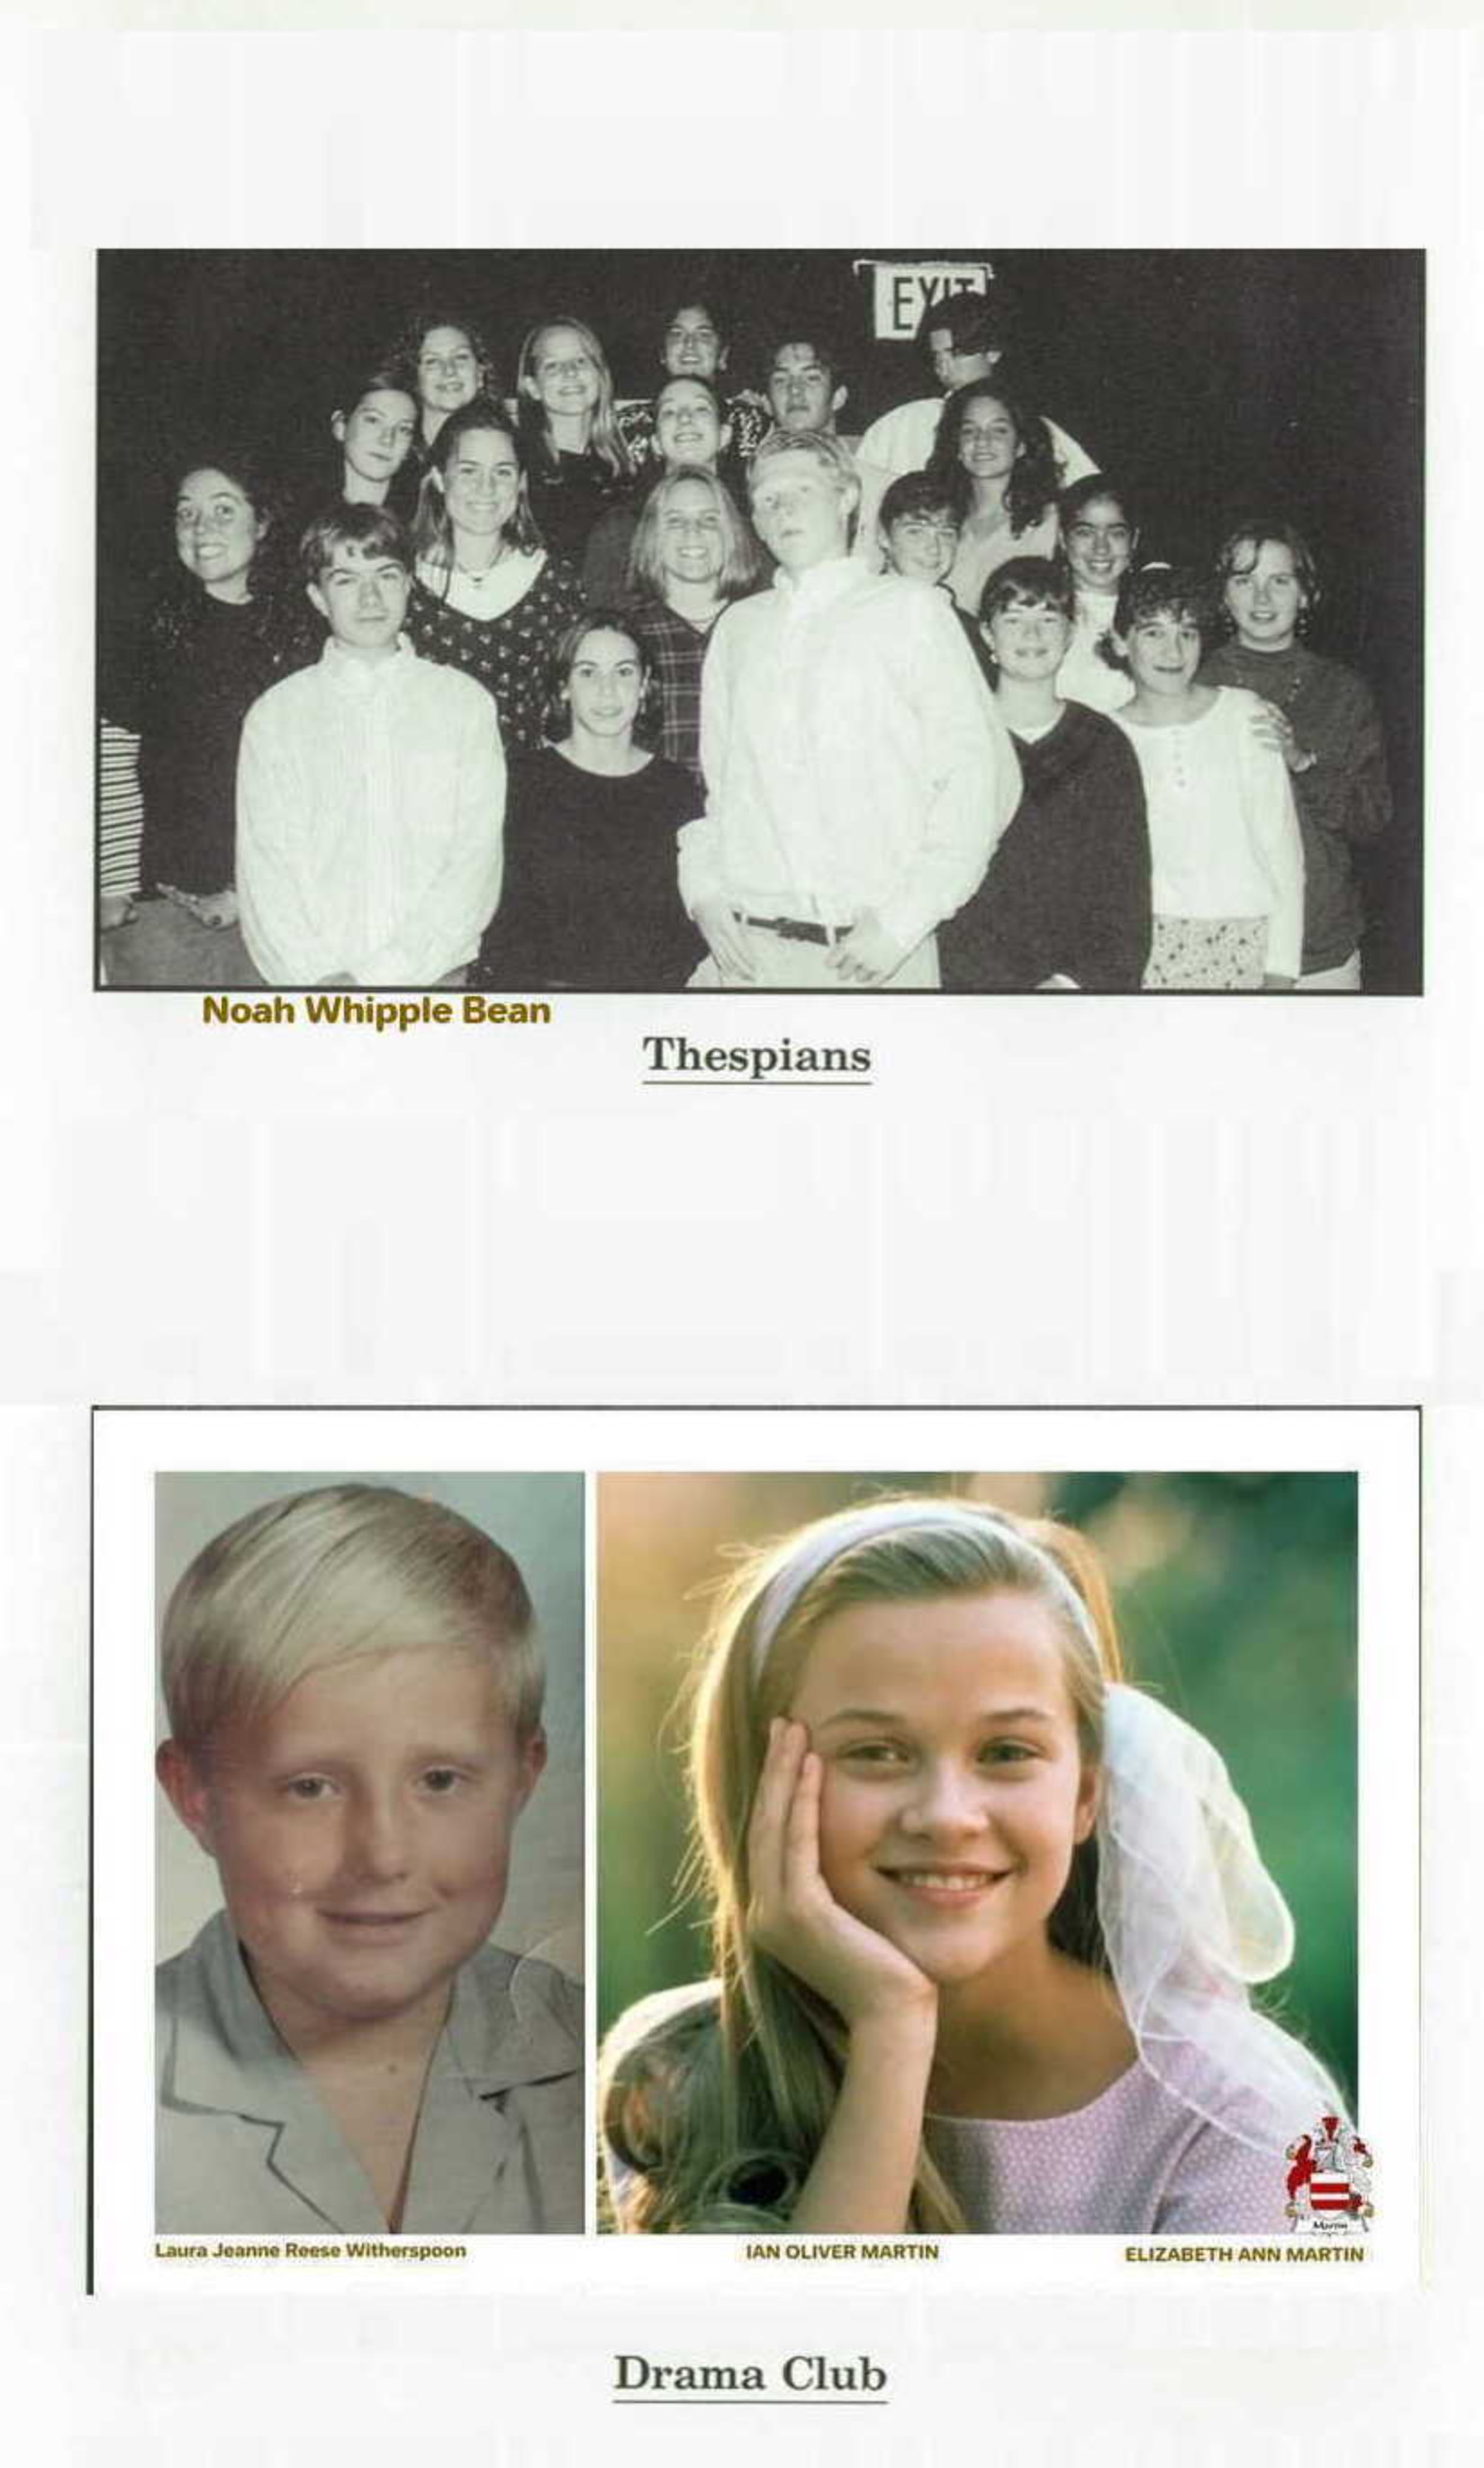 Noah Whipple Bean, Ian Oliver Martin, Reese Witherspoon